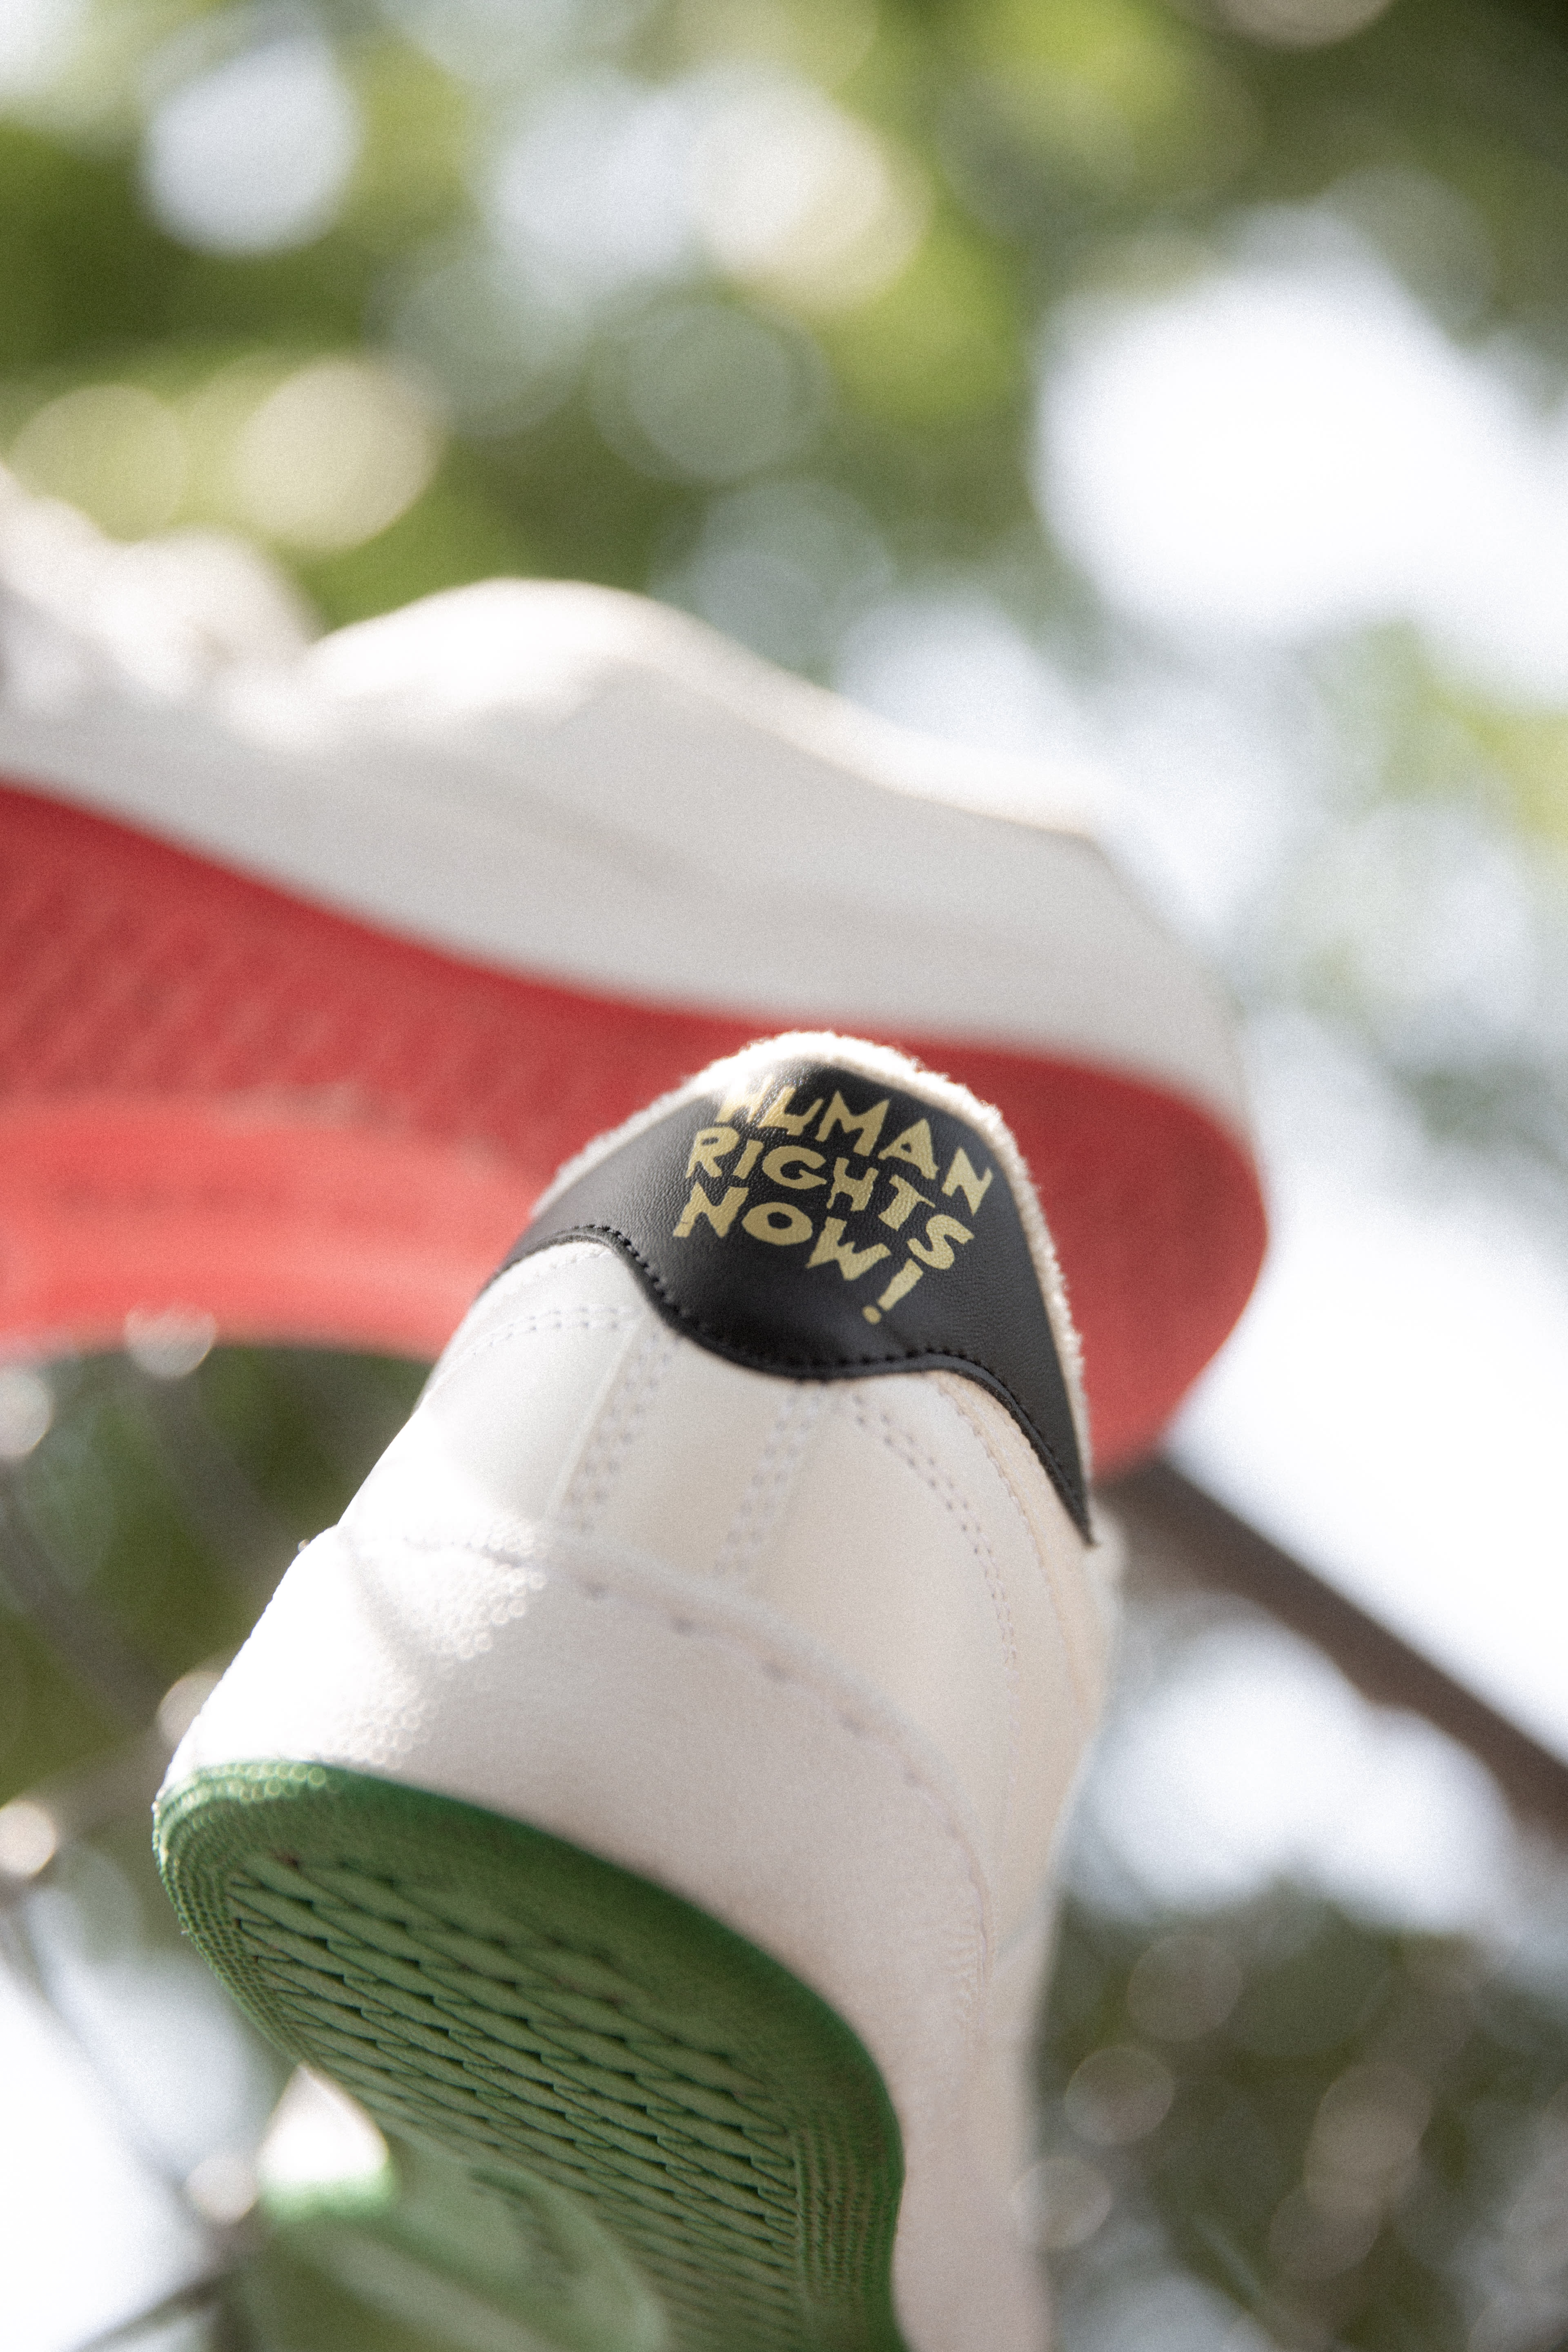 Reebok Human Rights Now! Collection